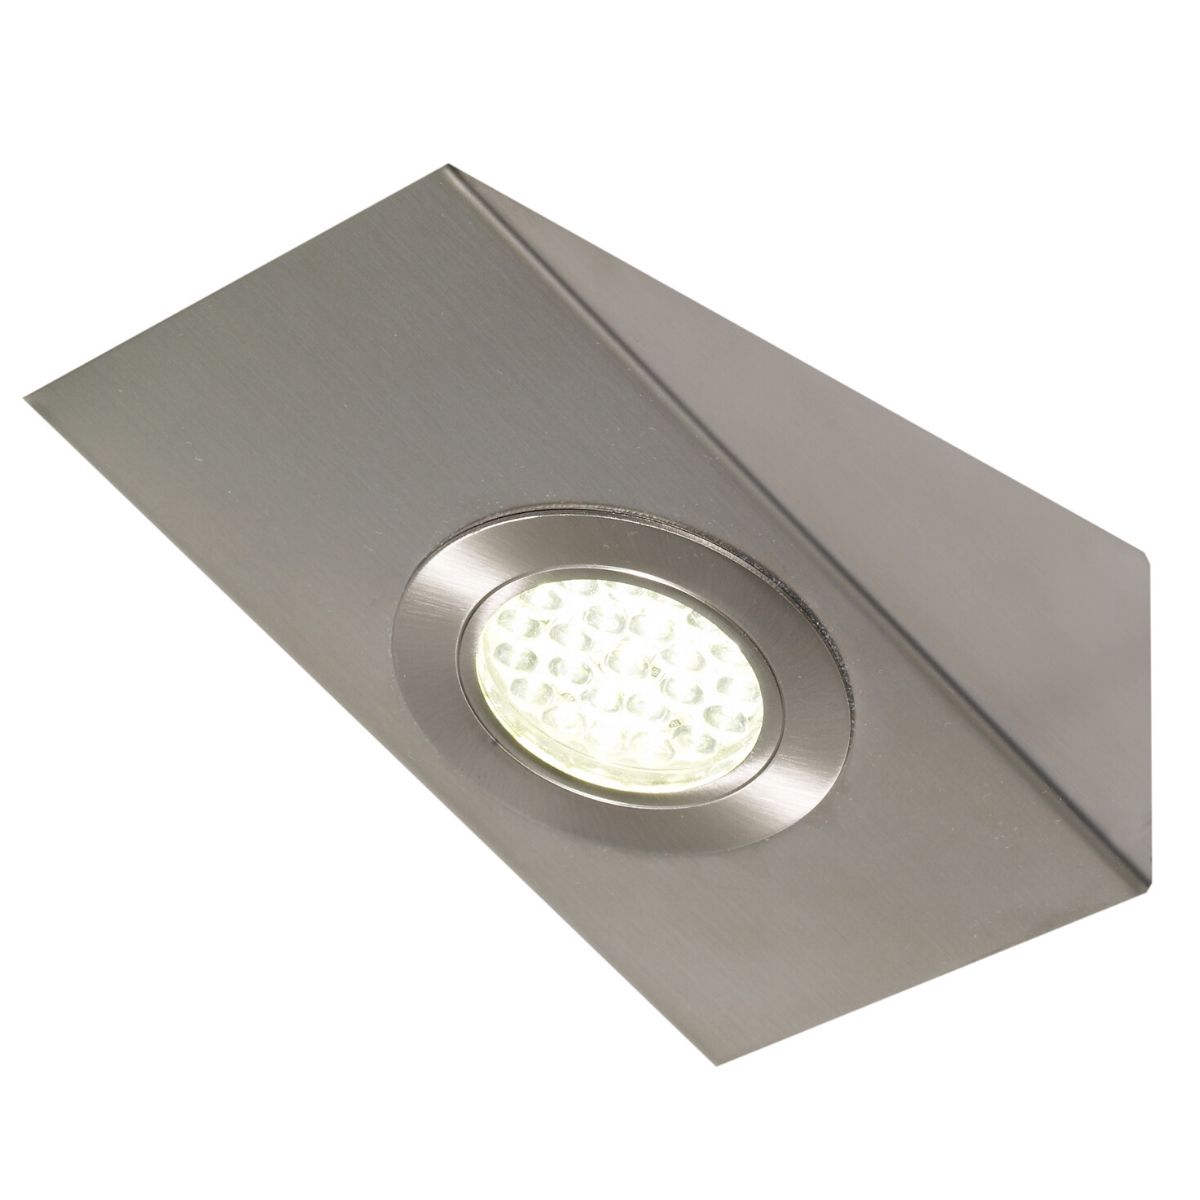 View 18w LED Wedge Shaped UnderCabinet Light Cool White or Warm White information